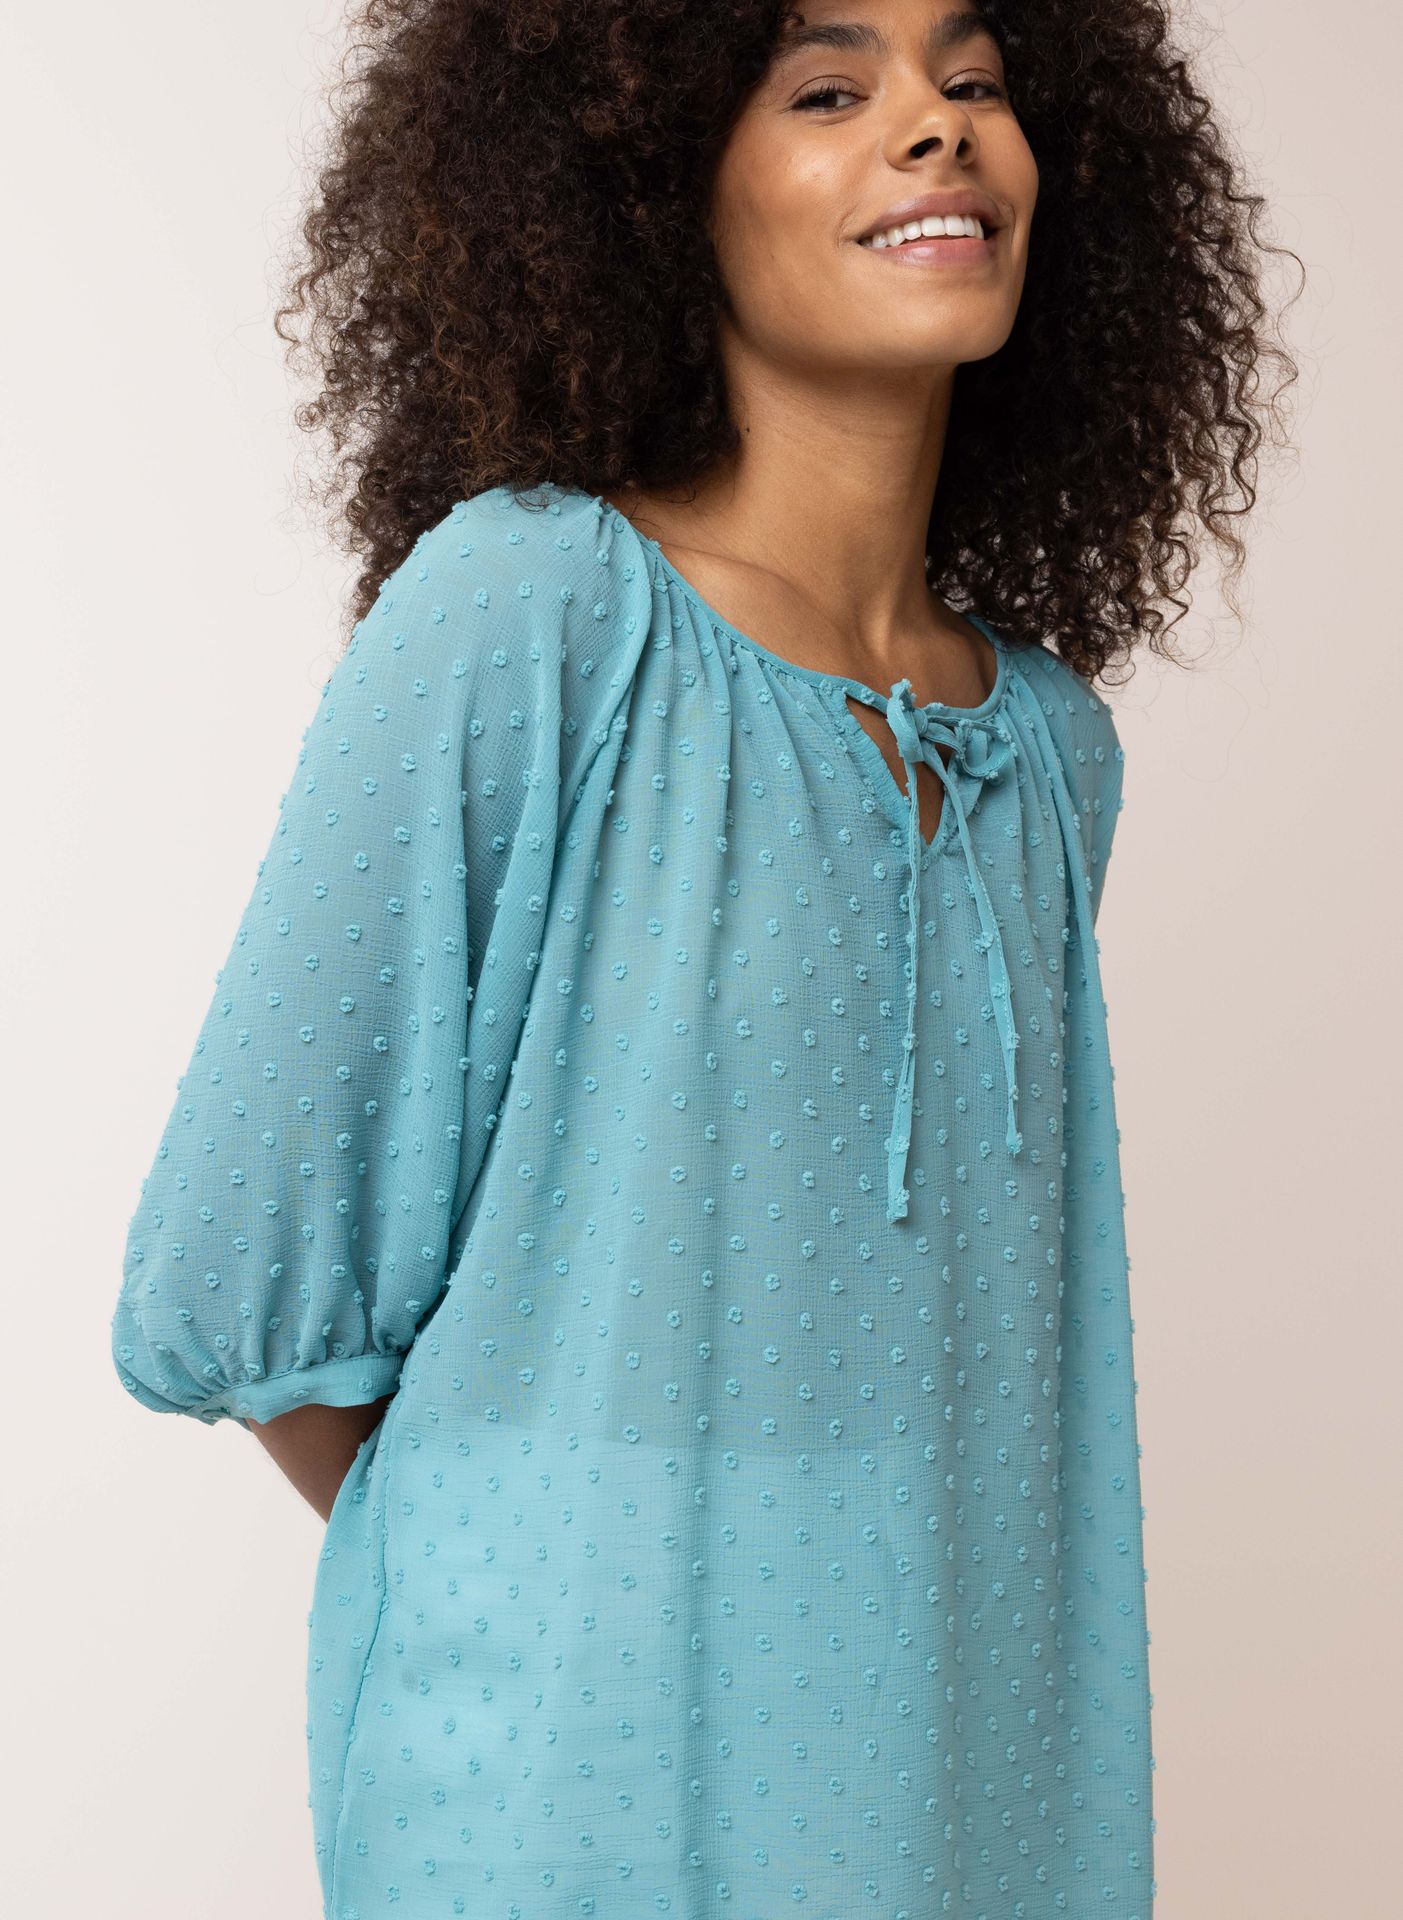 Norah Blouse turquoise turquoise 212787-475